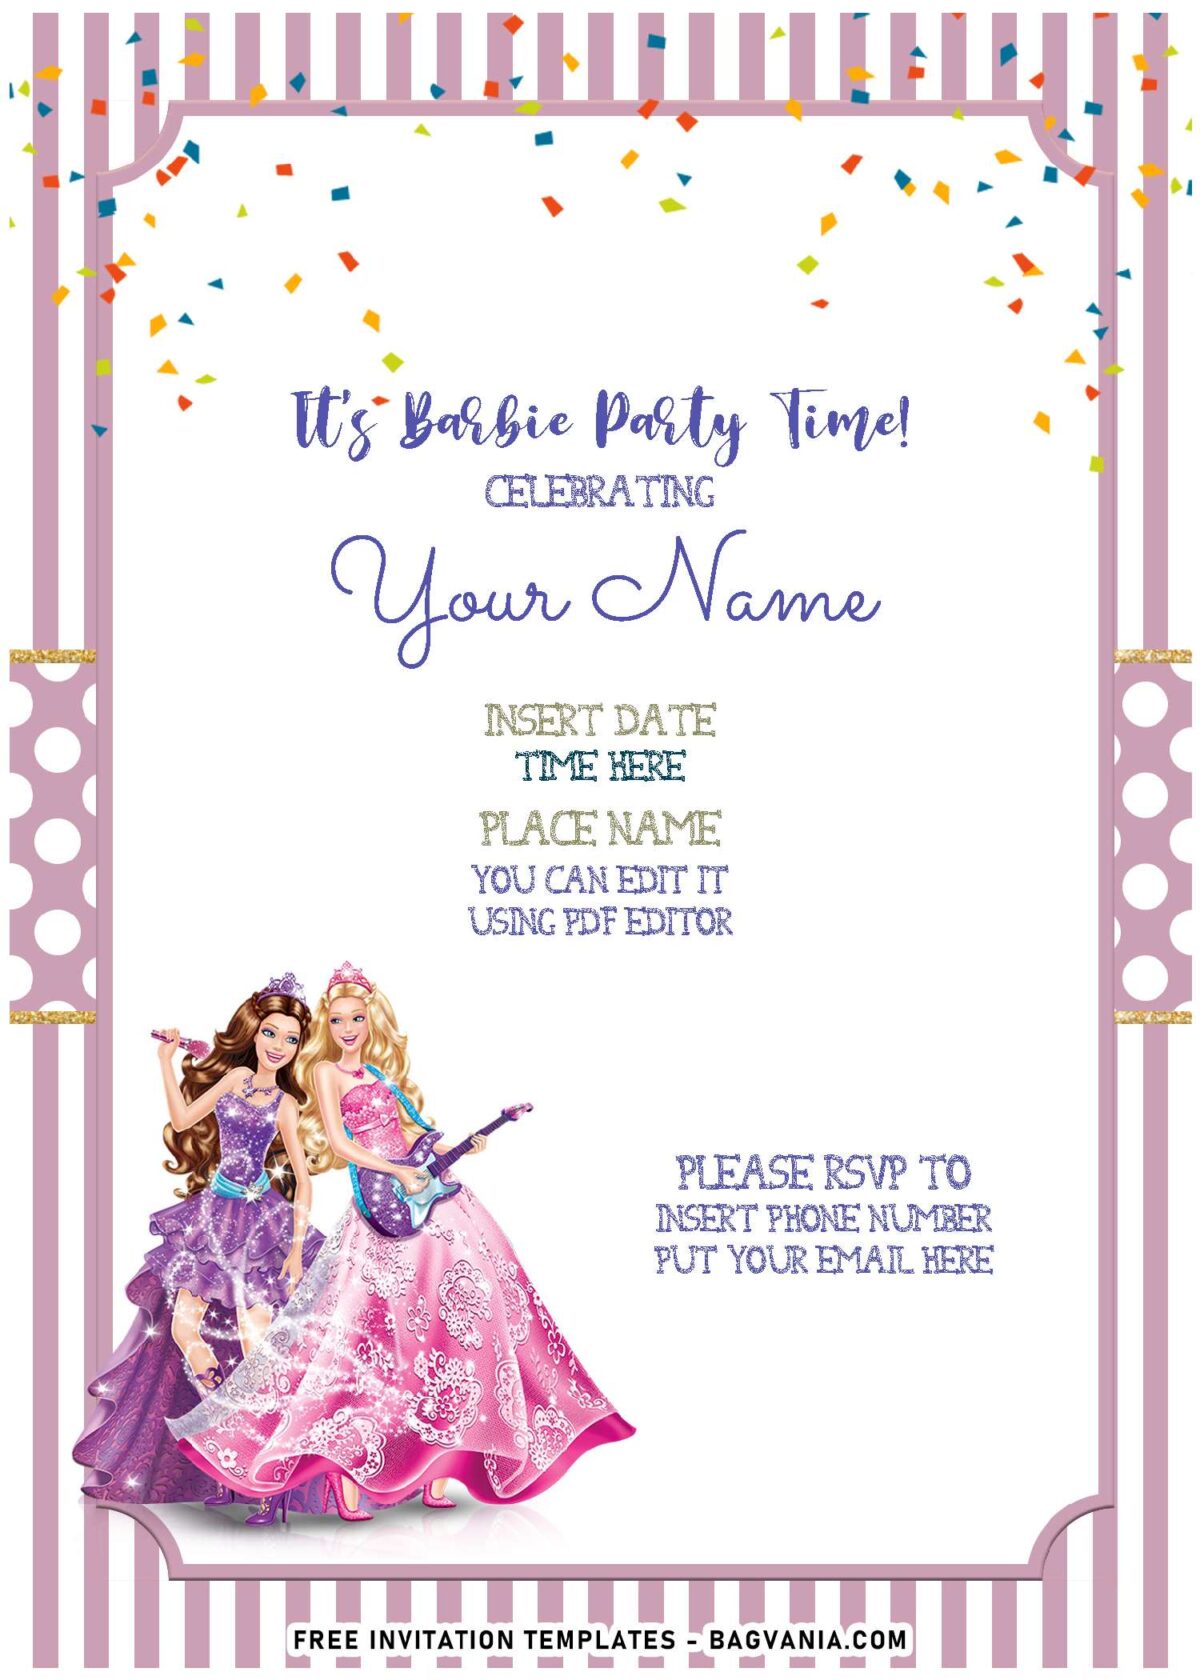 (Free Editable PDF) Festive Barbie Birthday Party Invitation Templates with cute pink striped background